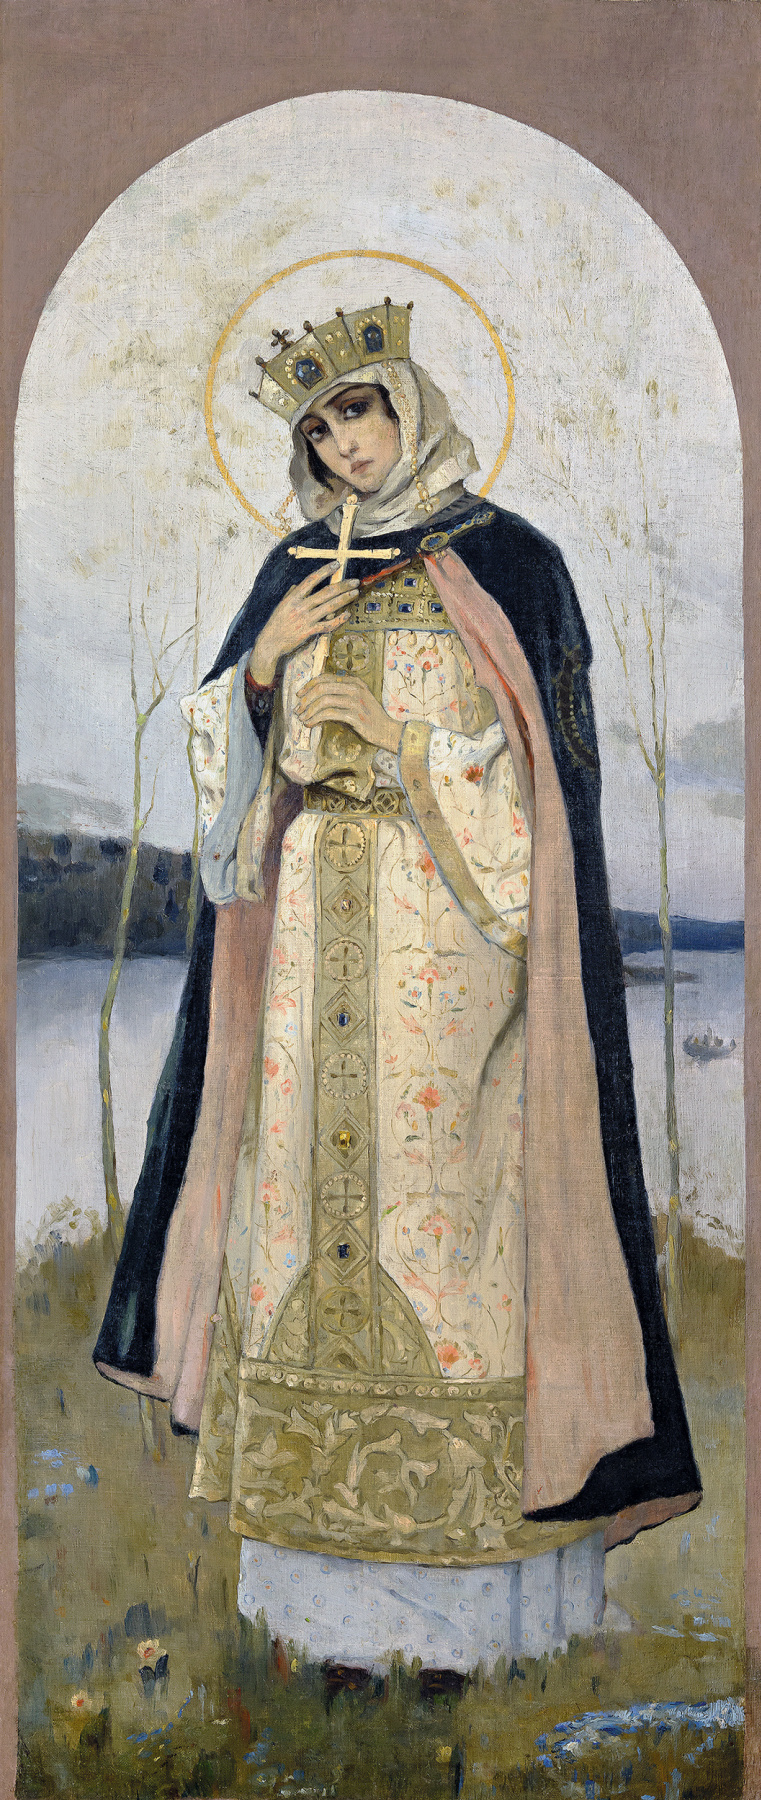 Mikhail Vasilyevich Nesterov. Holy equal to the apostles Princess Olga. Sketch the image of the iconostasis of the southern chapel in the choir of St. Vladimir Cathedral in Kiev